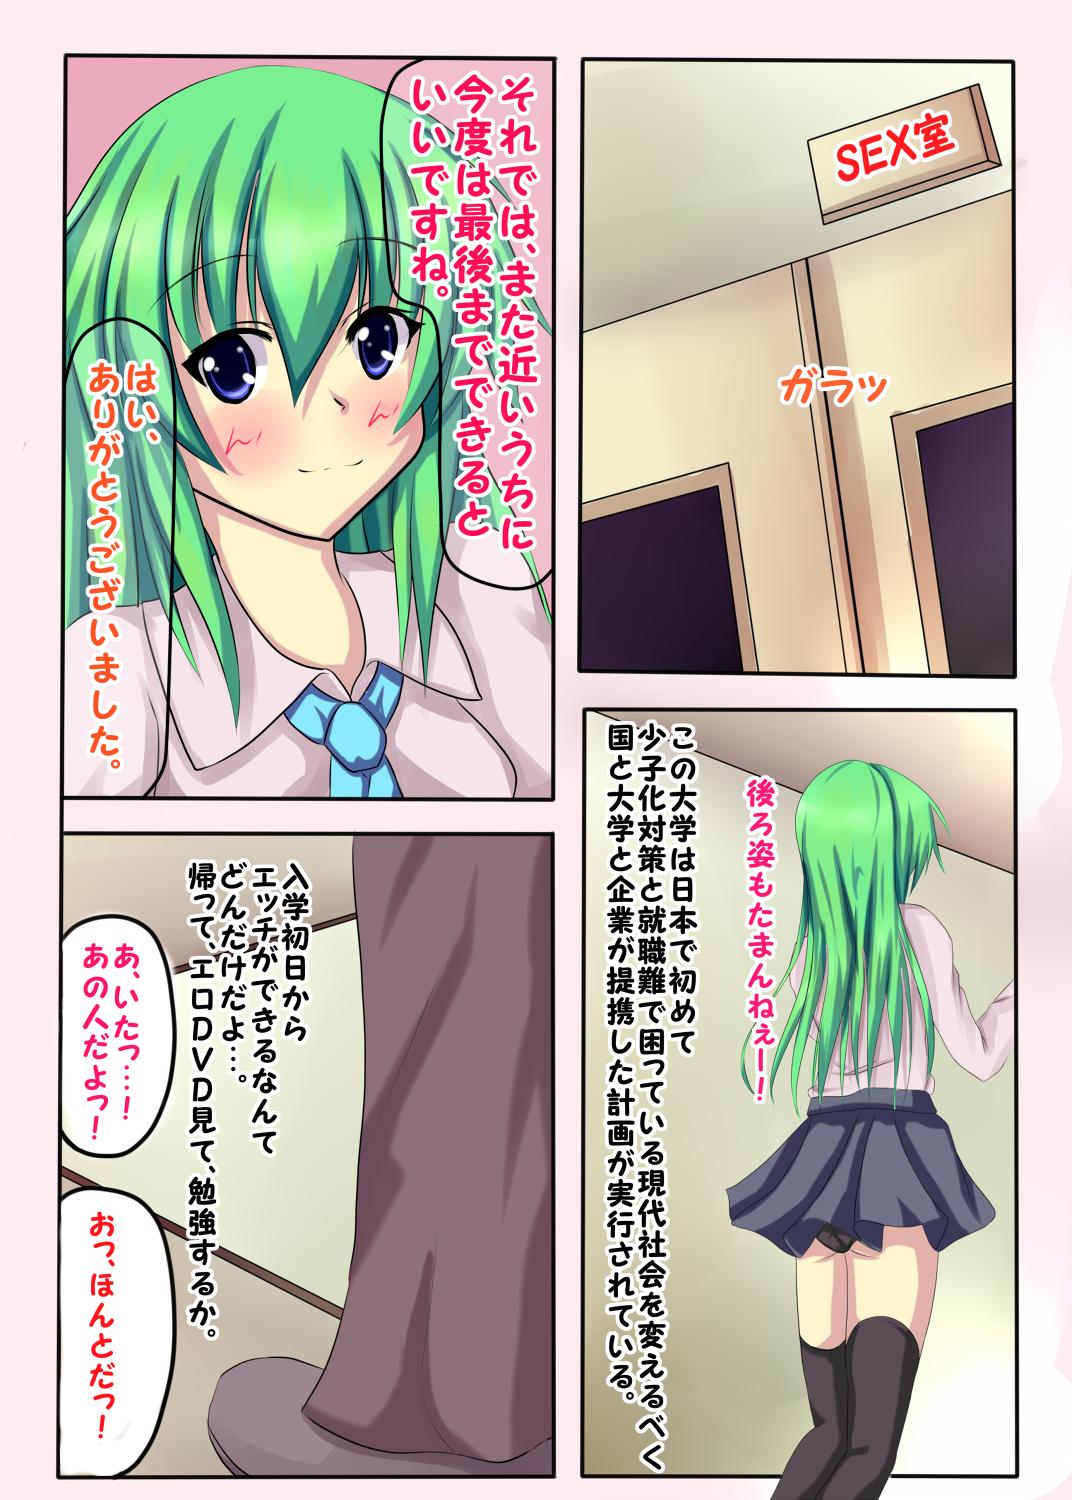 Realitykings 東方征服学園～童貞生徒の初めては早苗さん? - Touhou project Lolicon - Page 12